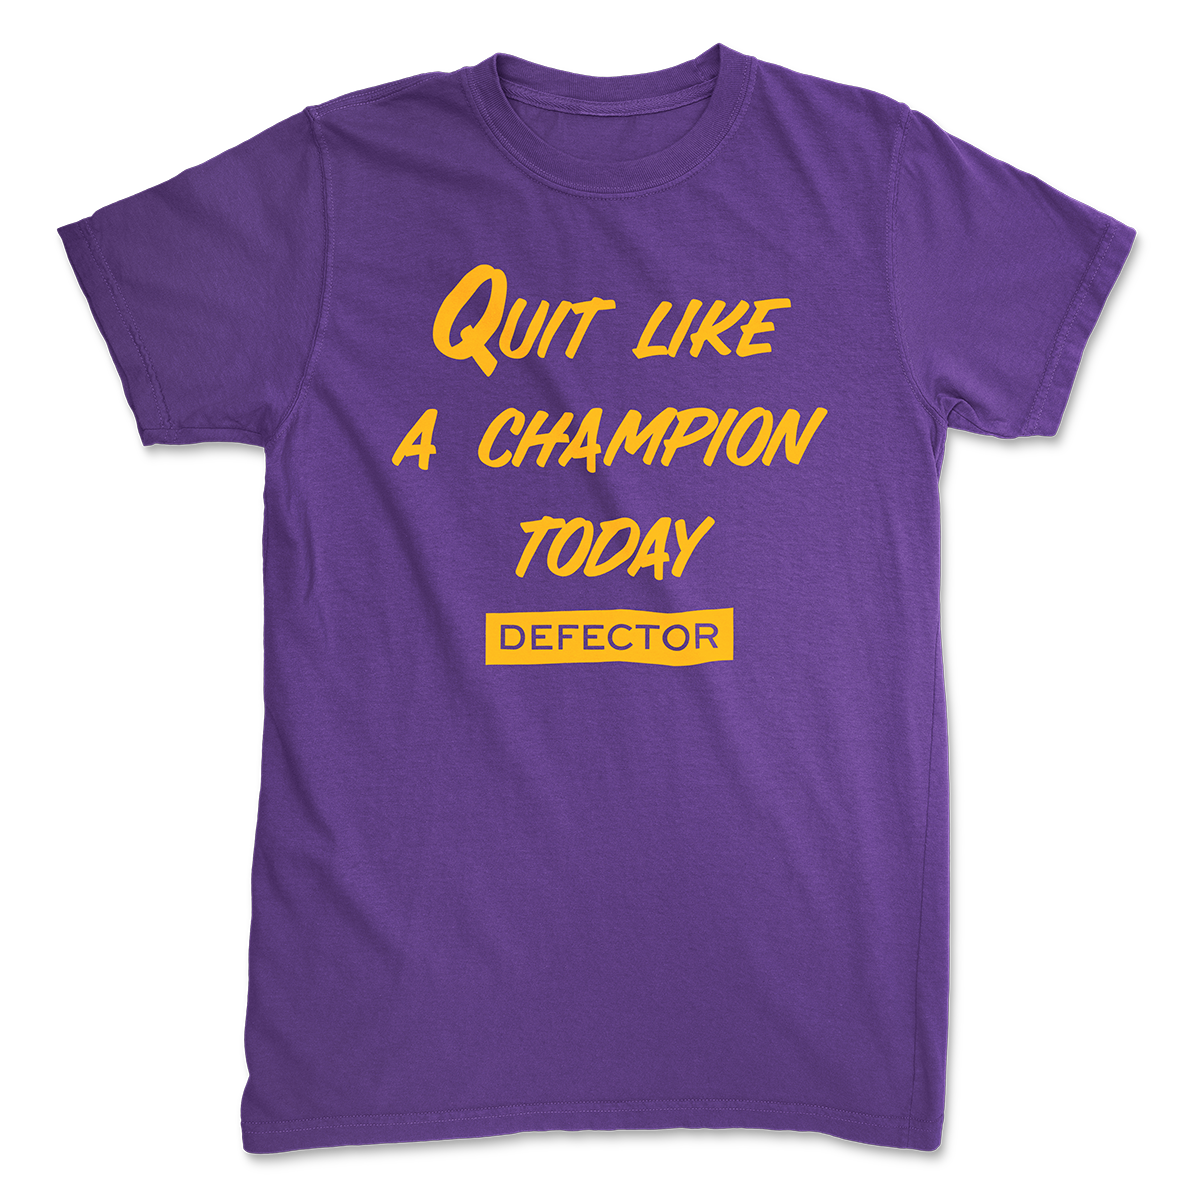 A Quit Like A Champion t-shirt. It's purple. And it has yellow text with "QUIT LIKE A CHAMPION" and the Defector logo in yellow.